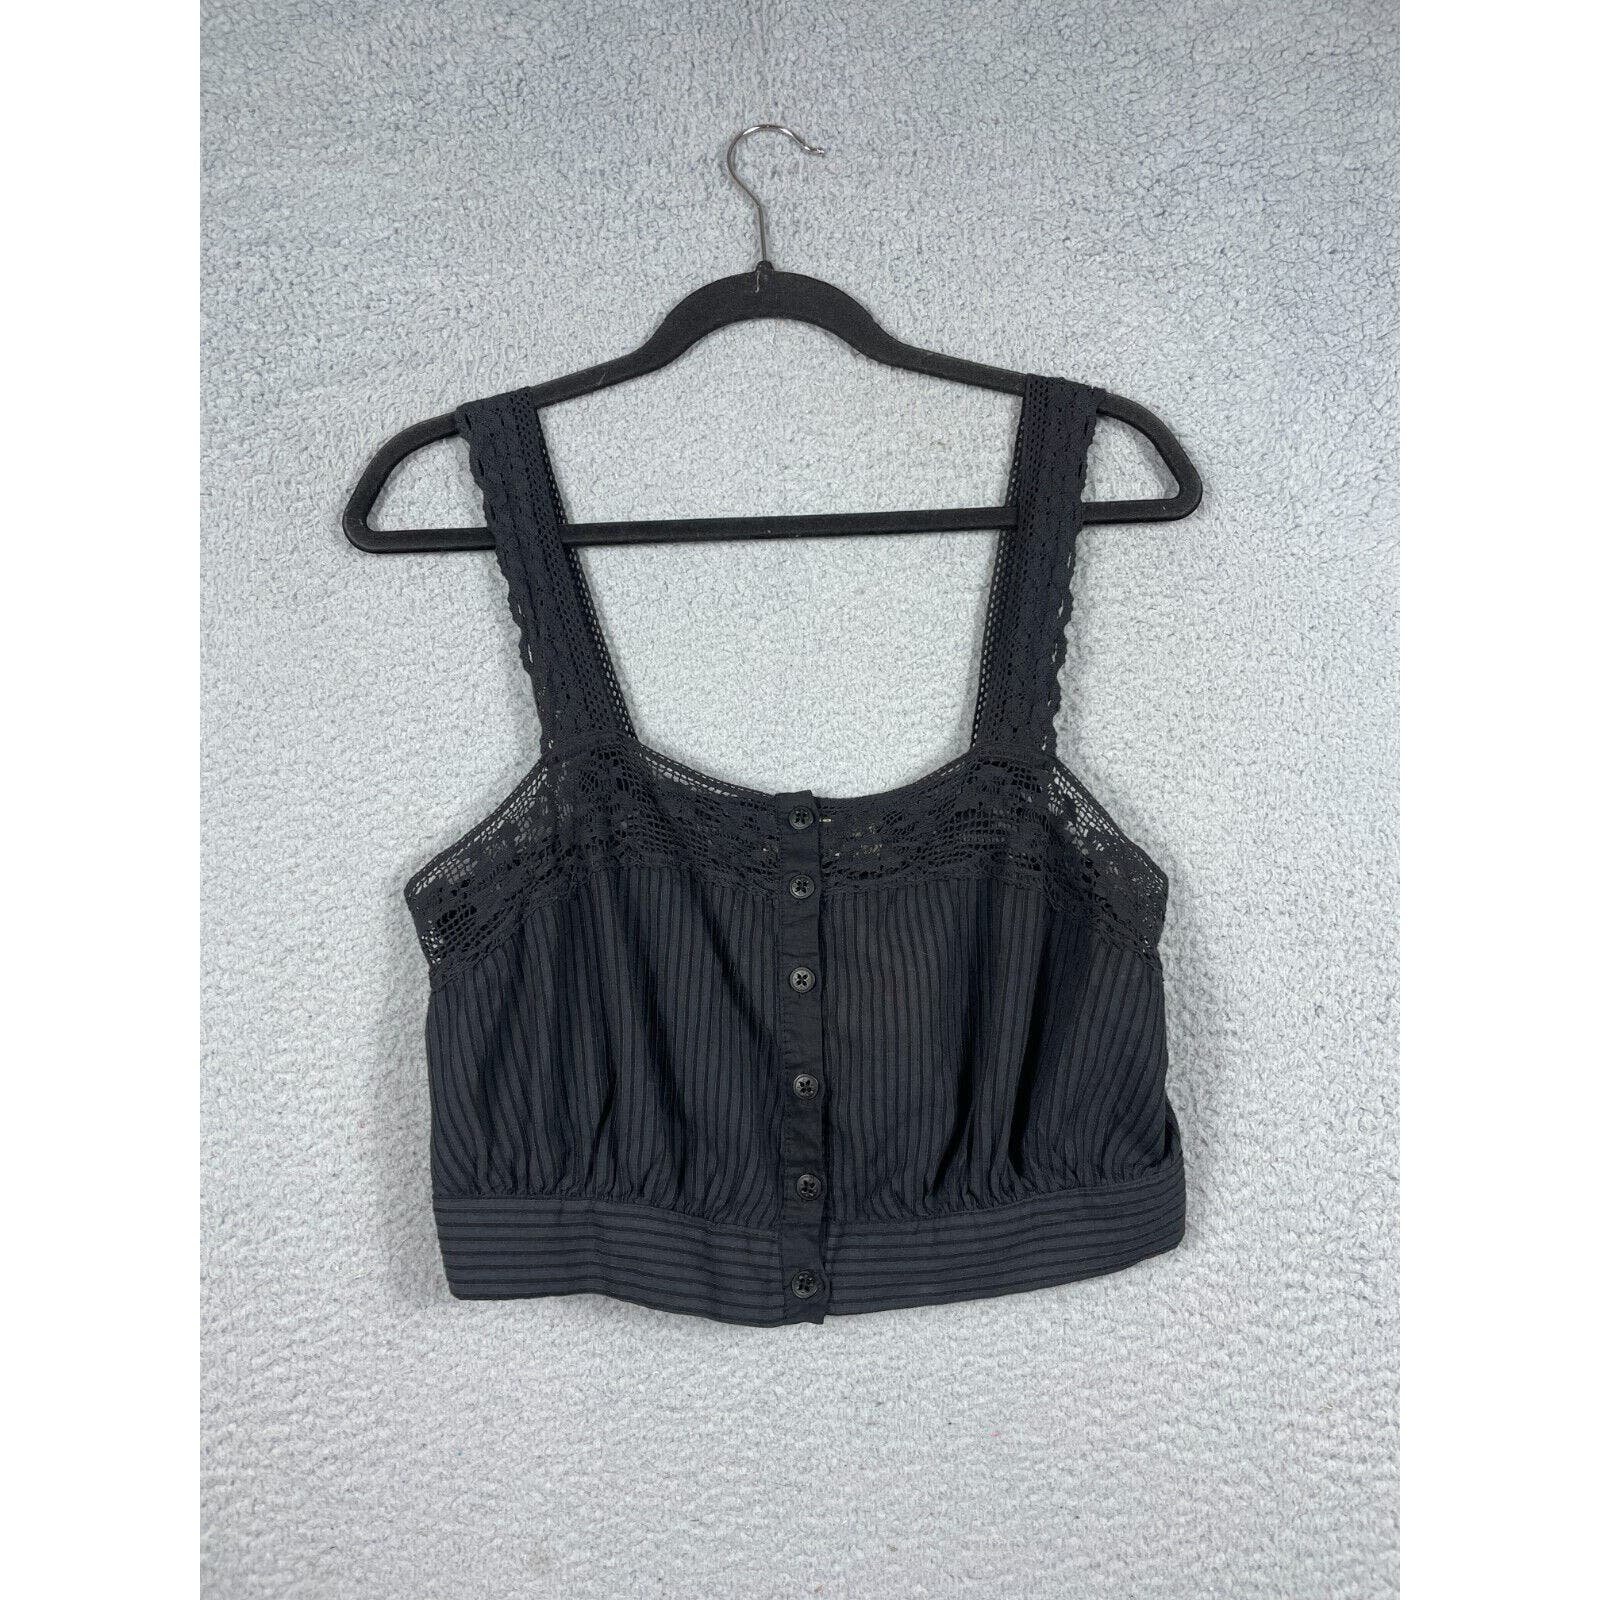 Buy Urban Outfitters Womens Size M Black Crop Tank Top 